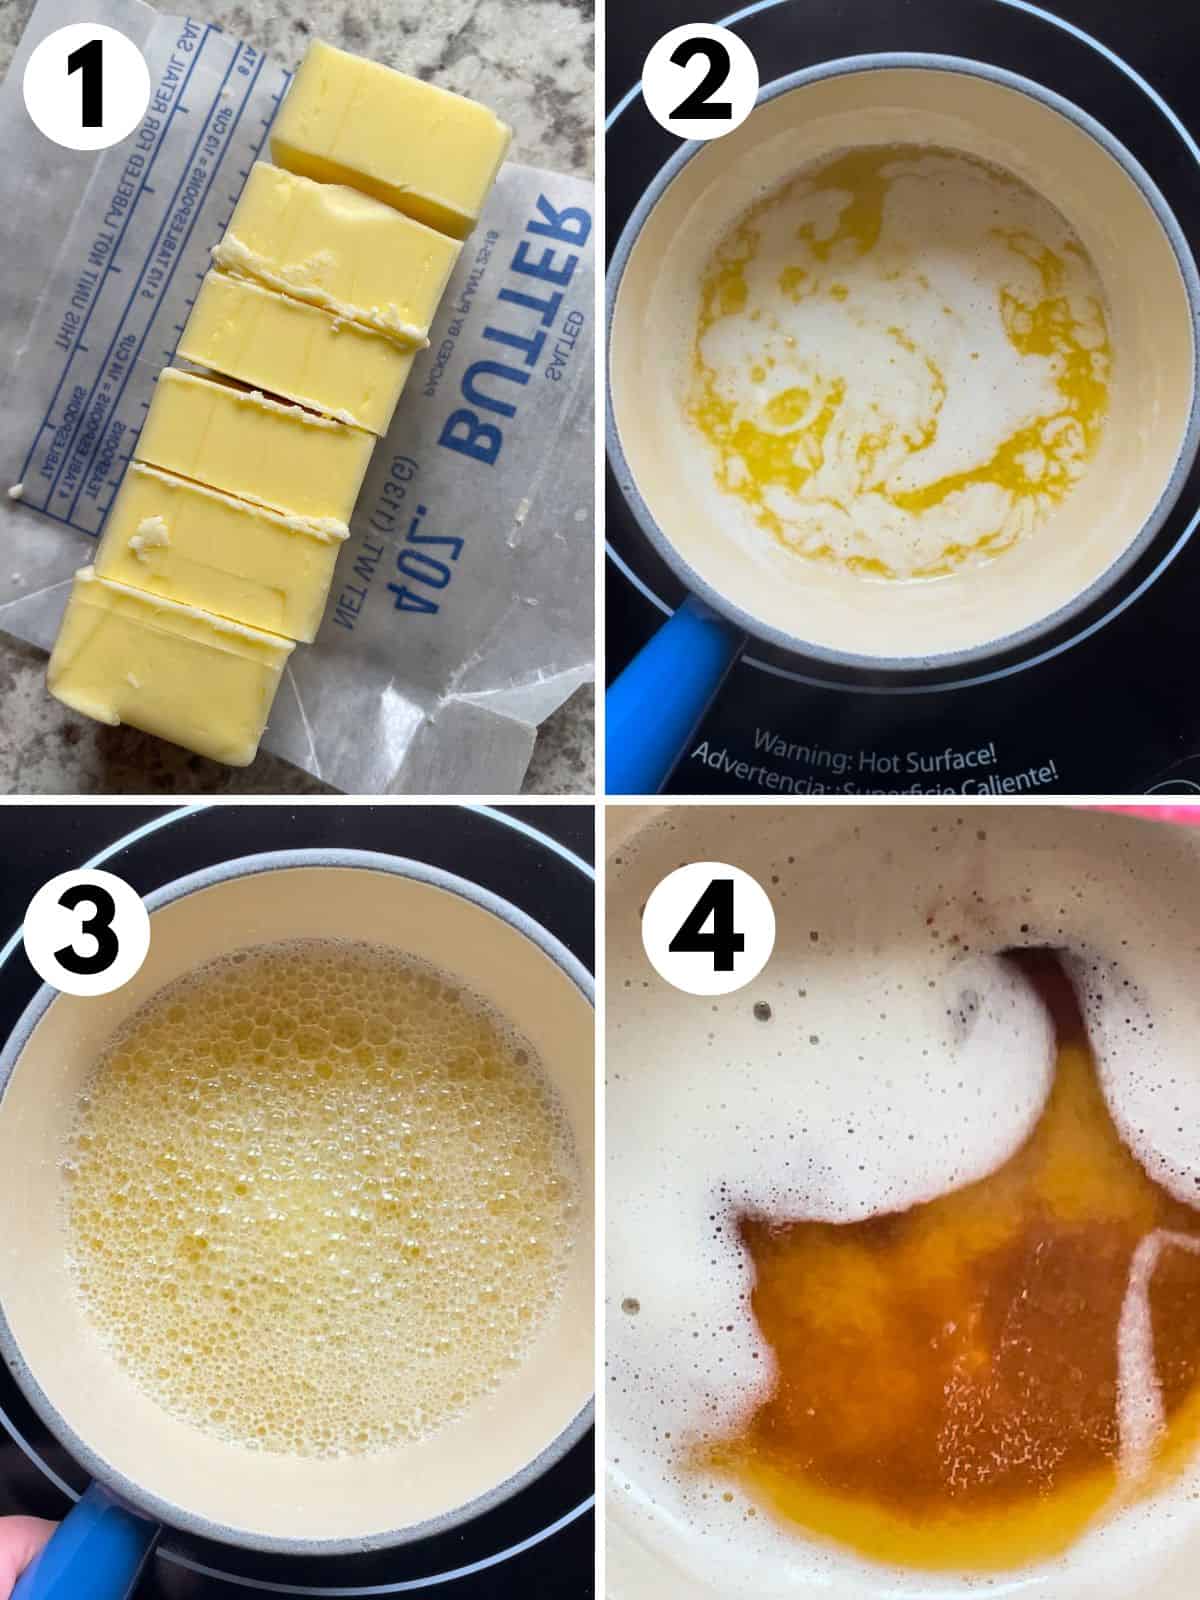 The four steps for browning butter. 1. Butter cut into 6 pieces. 2. Melted butter in the pan. 3. Butter bubbling and starting to foam. 4. Brown butter under a layer of foam. The foam has been moved away with a spatula.